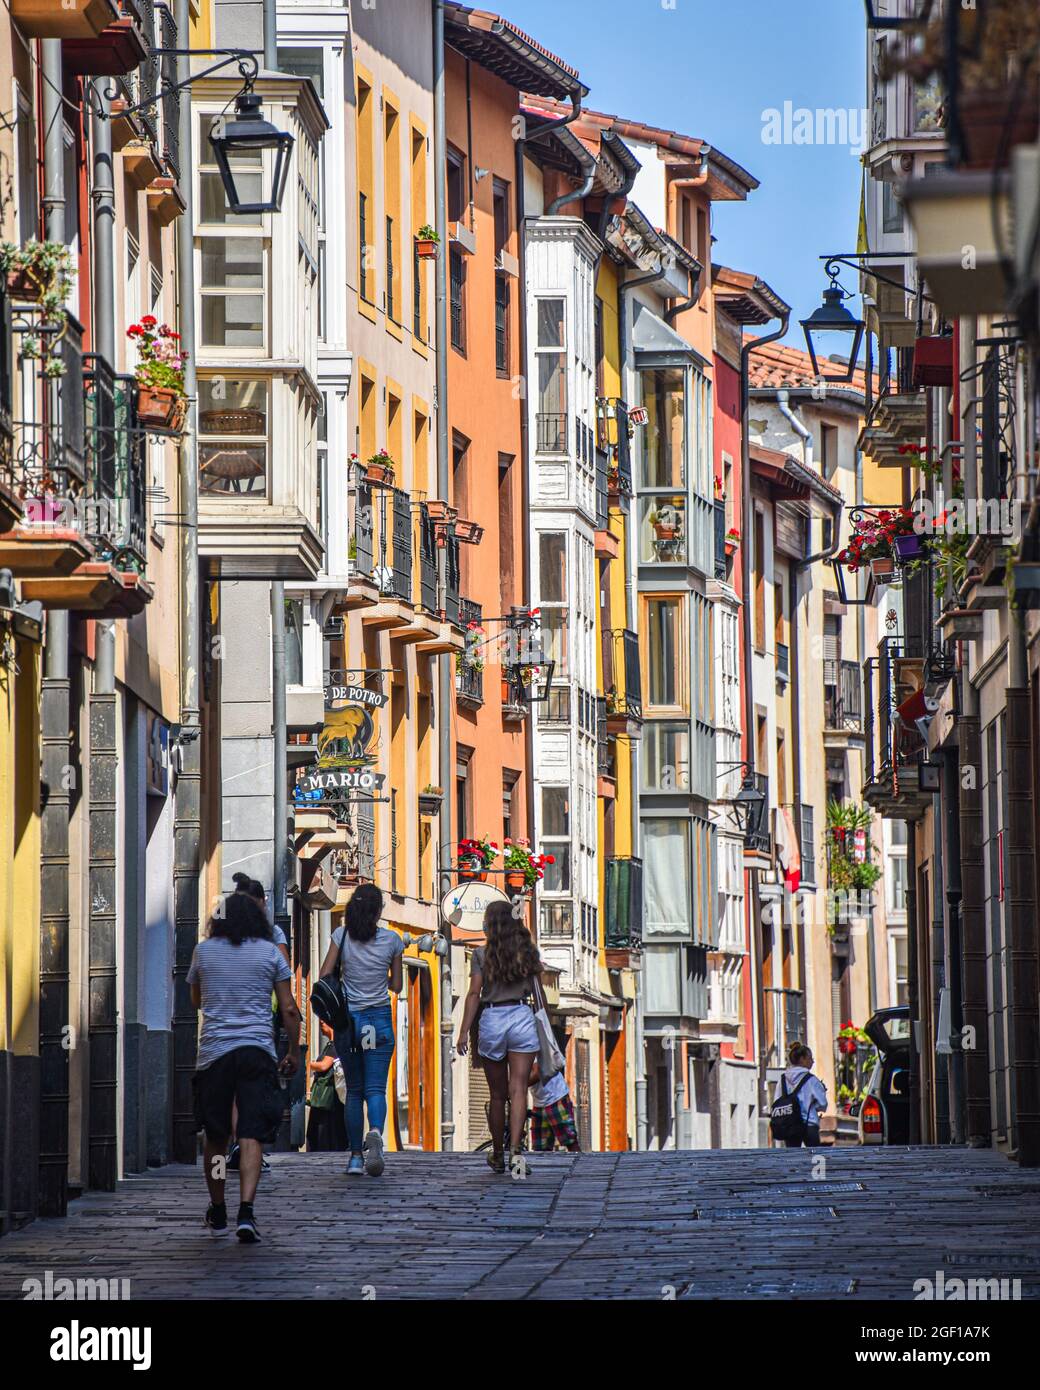 Vitoria-Gasteiz, Spain - 20 August 2021: Colorful buildings in the narrow  streets of old town Vitoria Gasteiz Stock Photo - Alamy